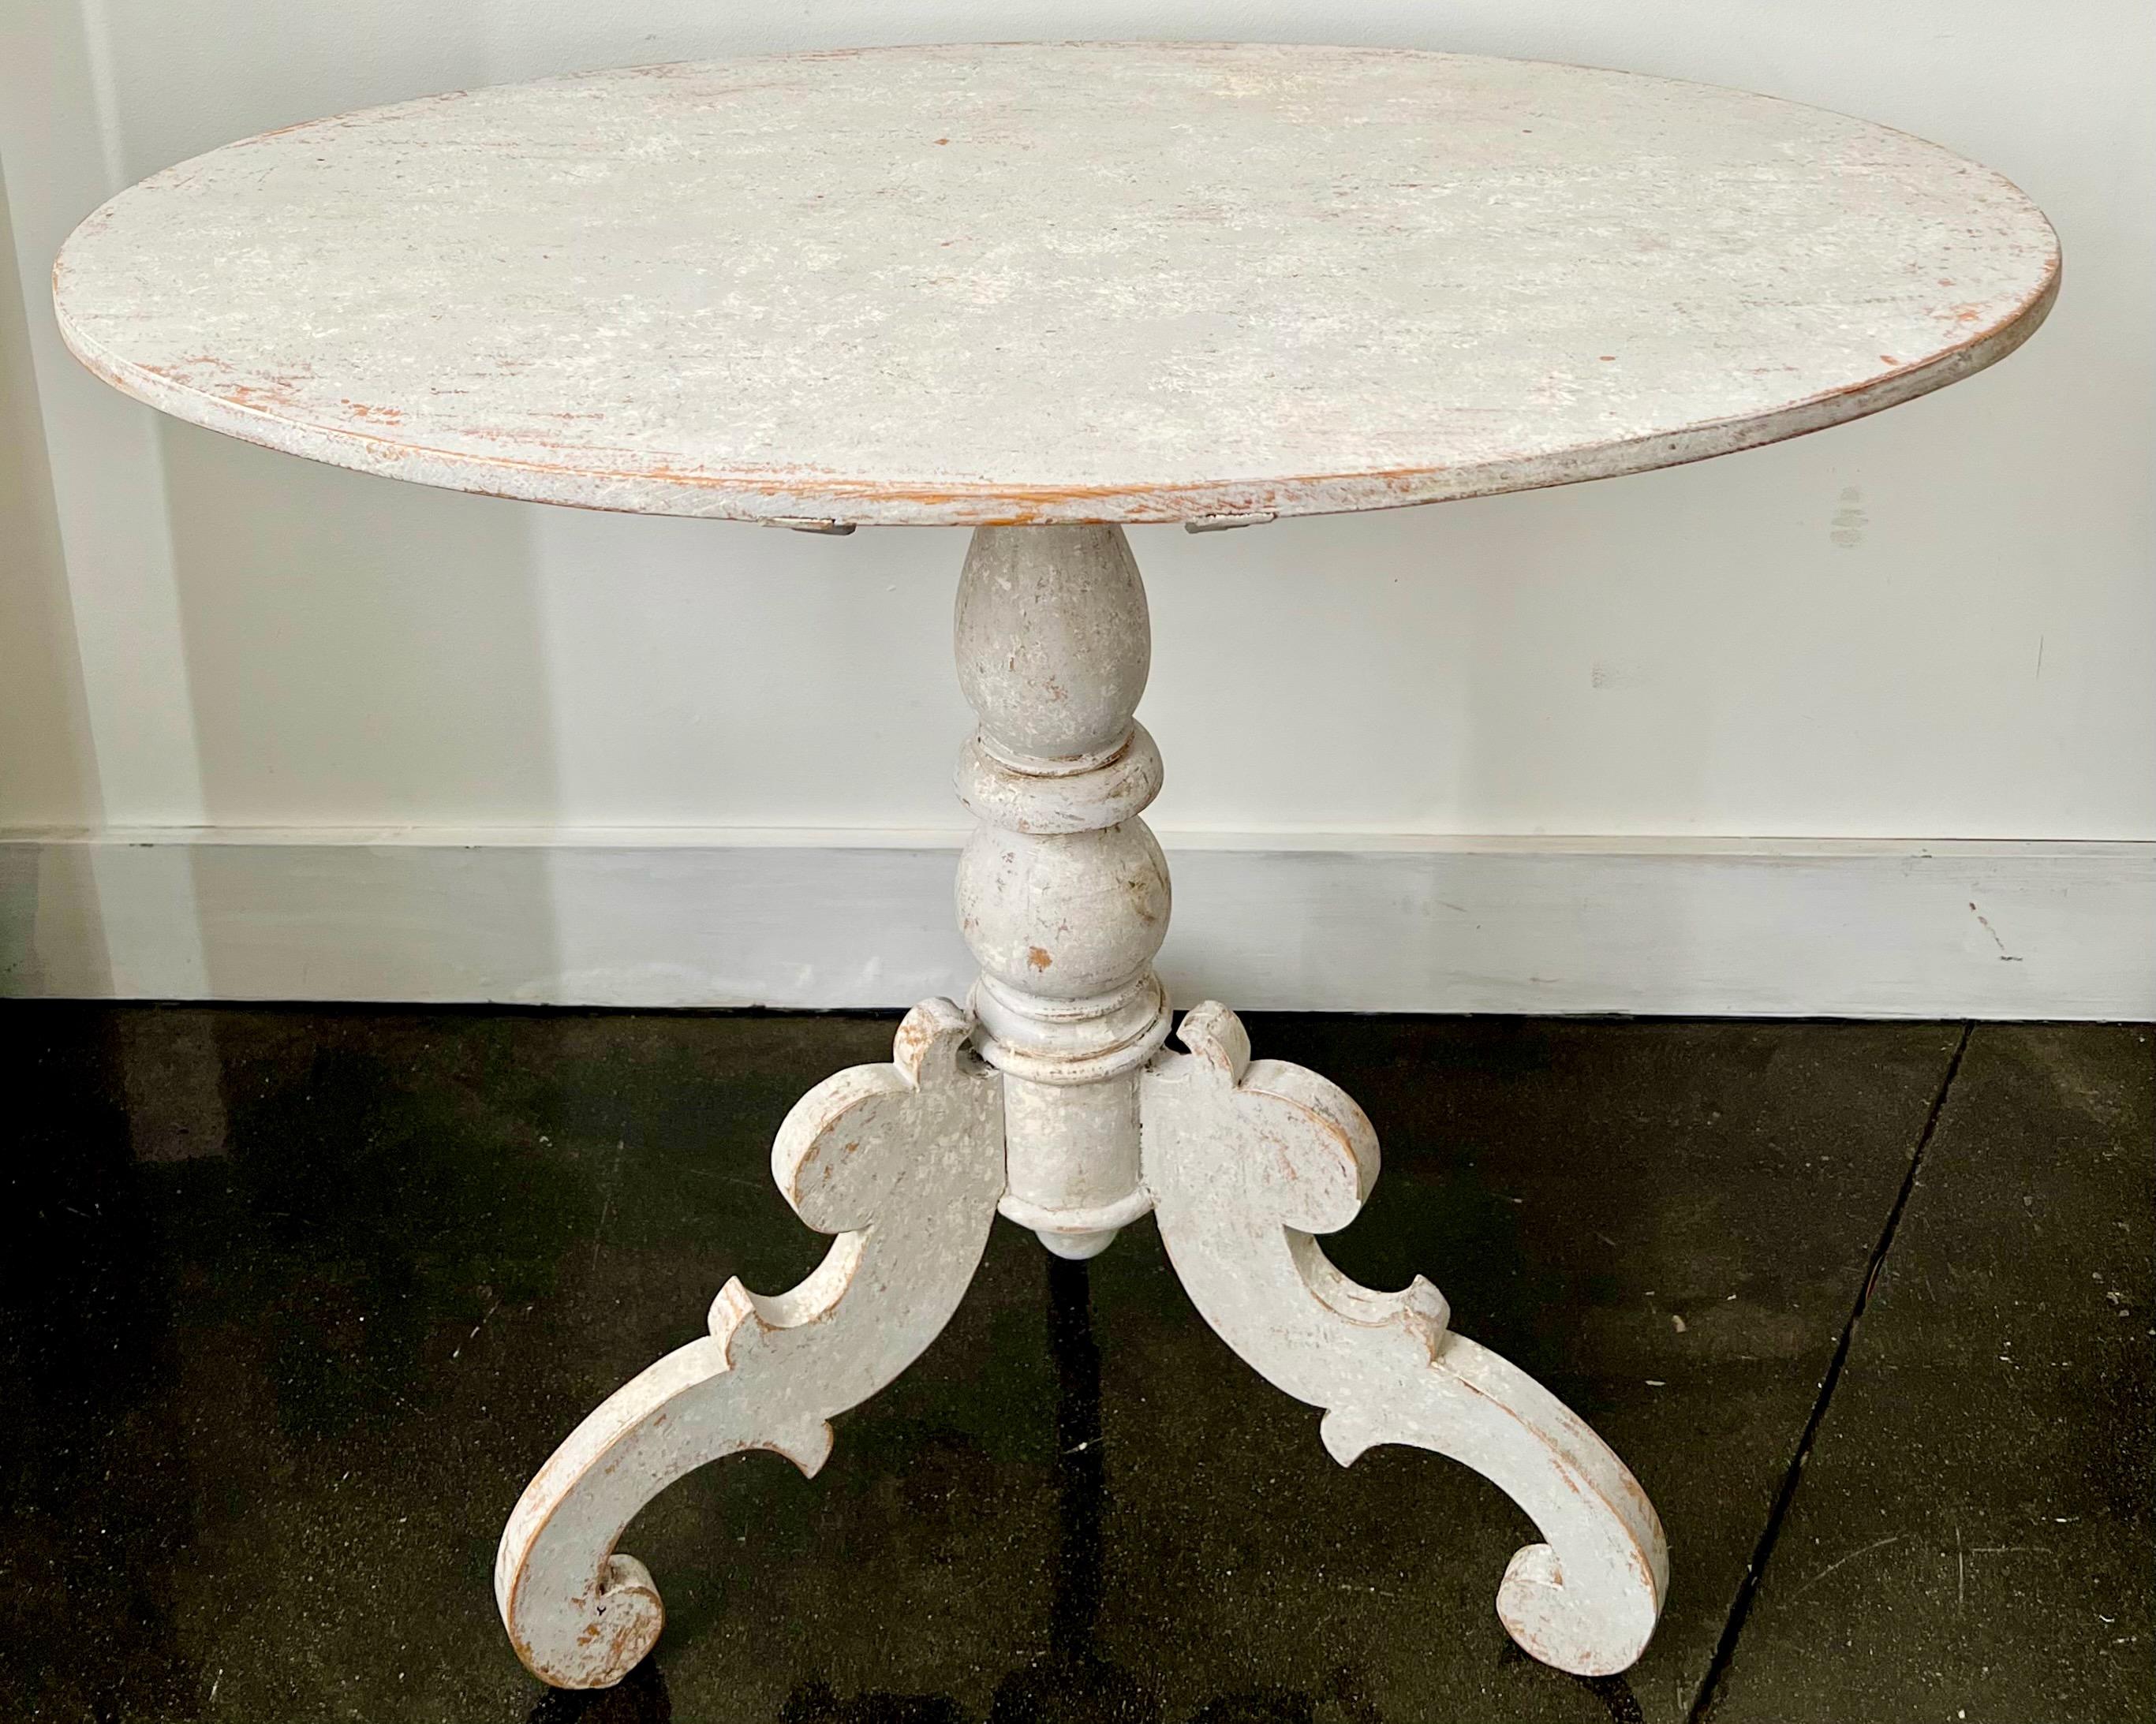 A charming large pedestal table with oval top and turned base supported by intricately carved scrolling legs in Gustavian style.
Could be use as a small breakfast table
Värmland, Sweden, circa 1840-1850.